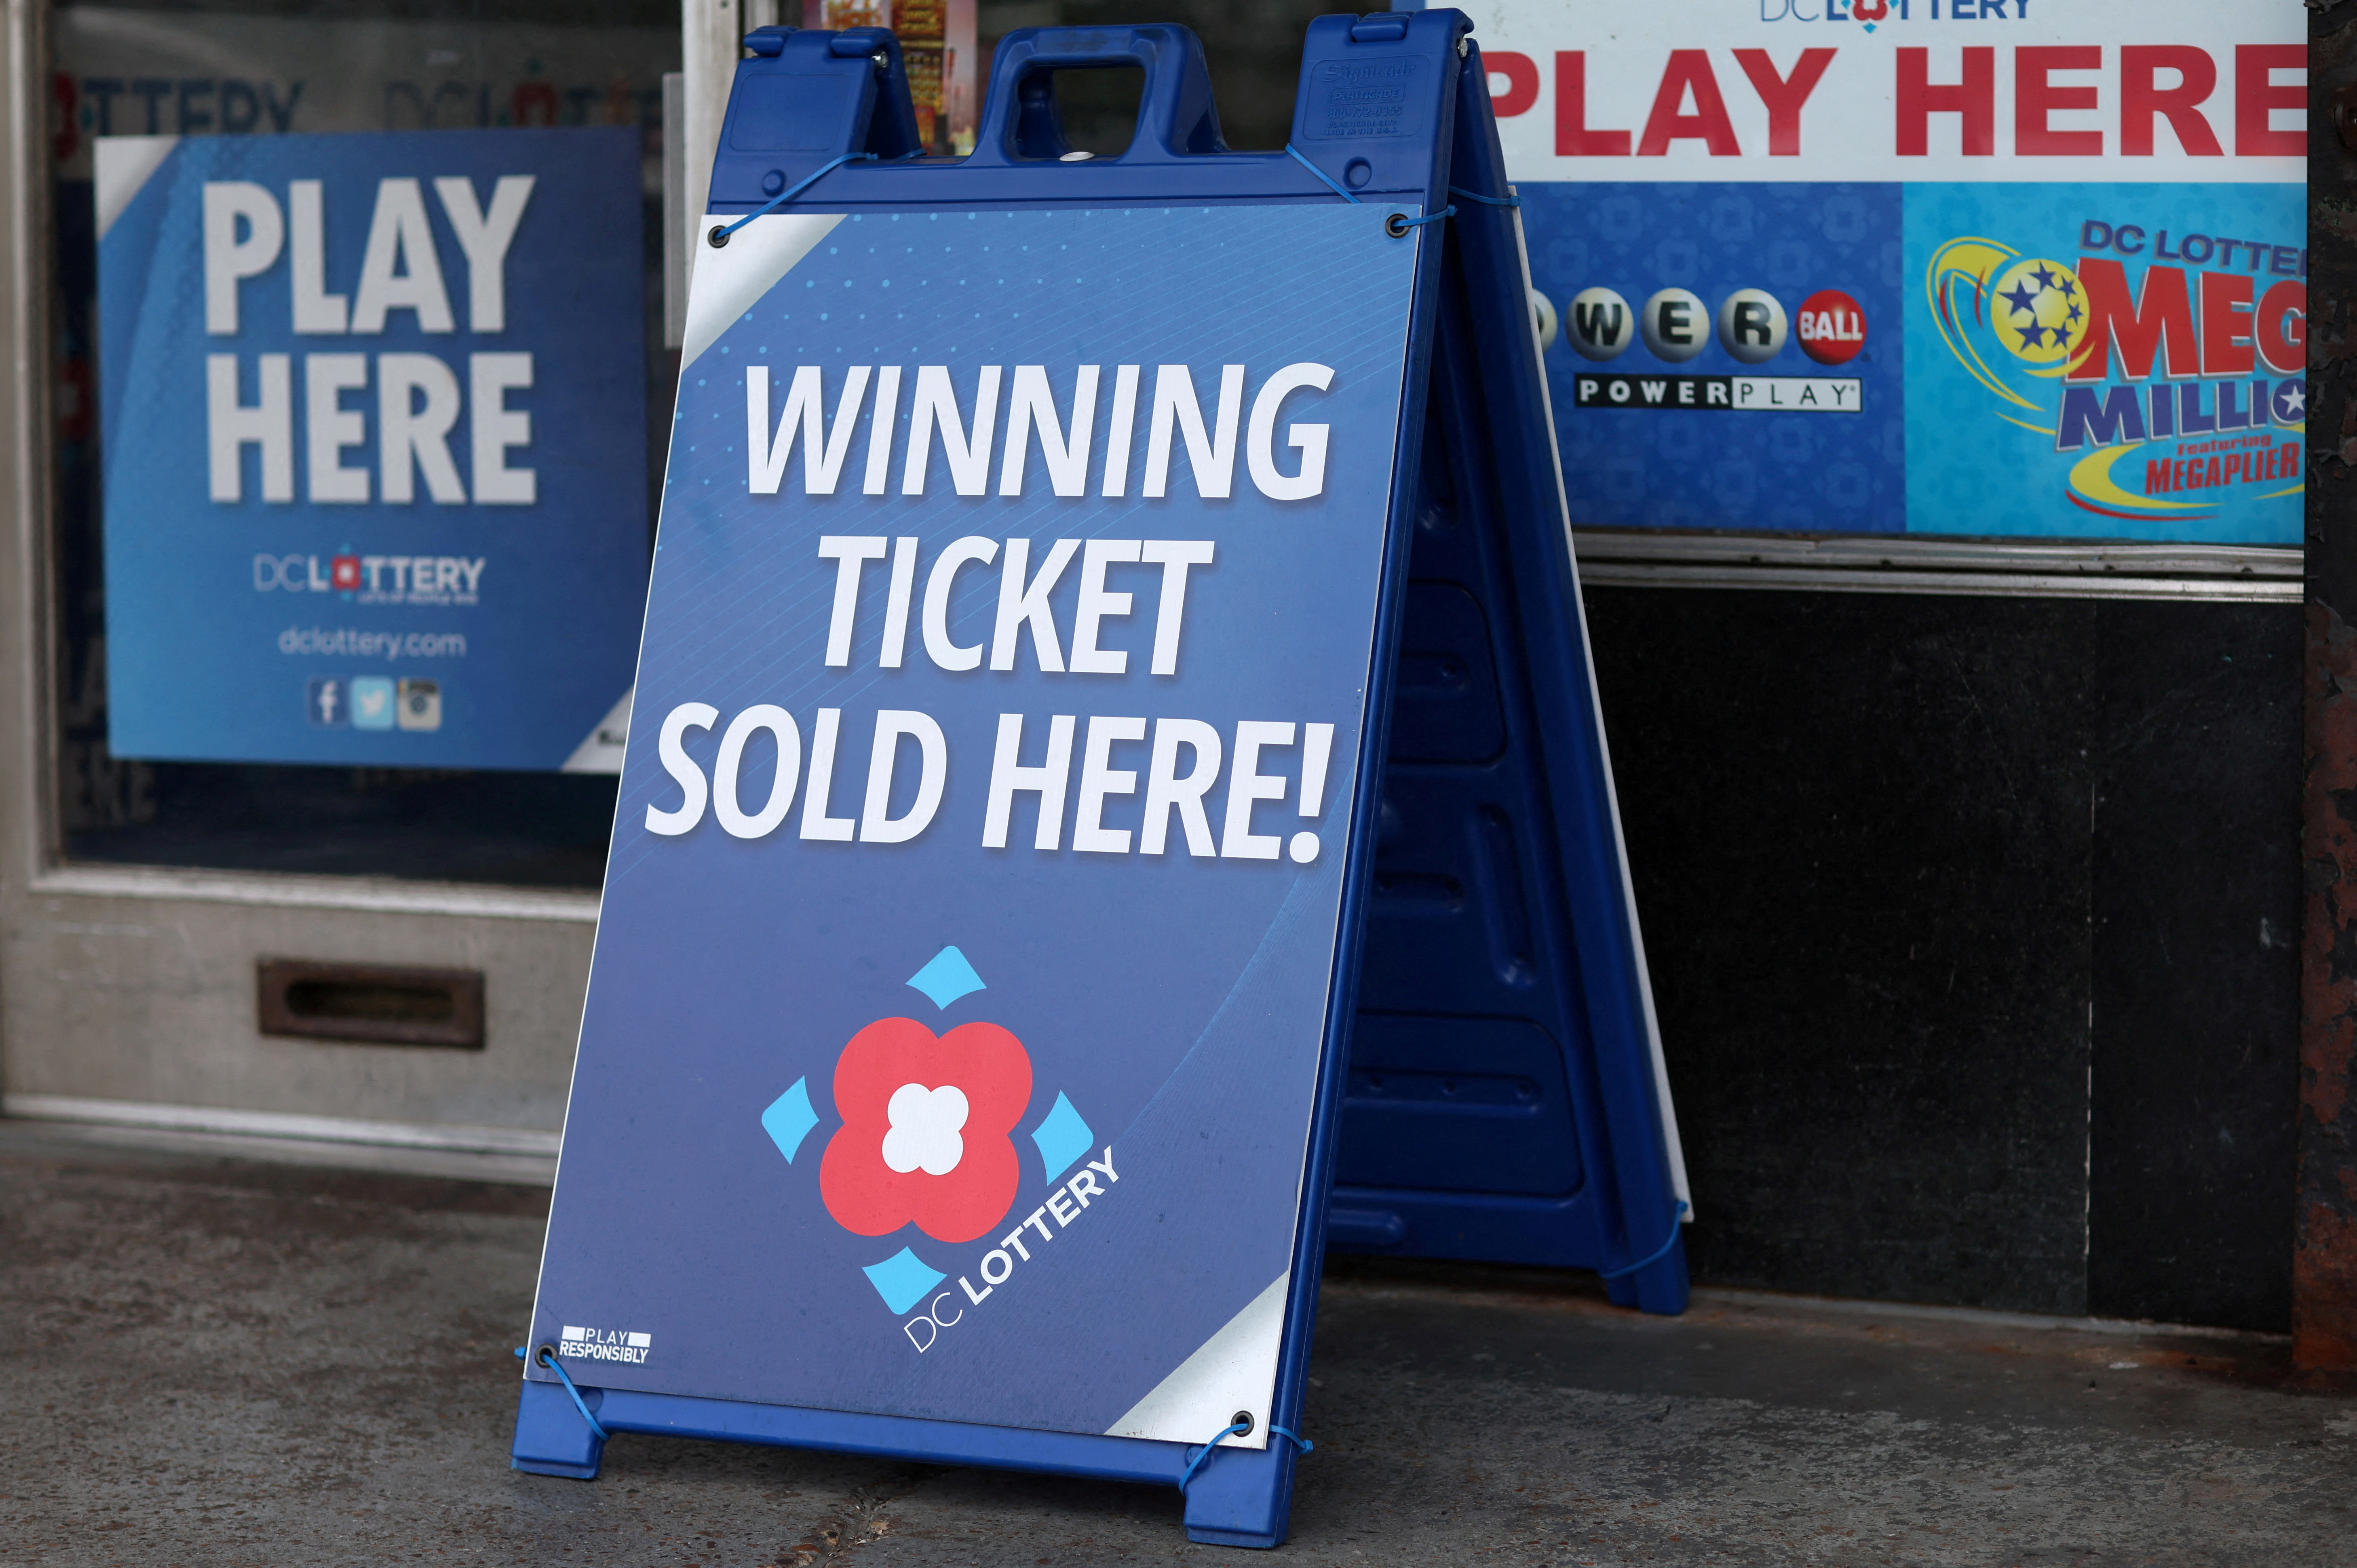 Lotto ticket signs advertising Mega Millions and the Powerball